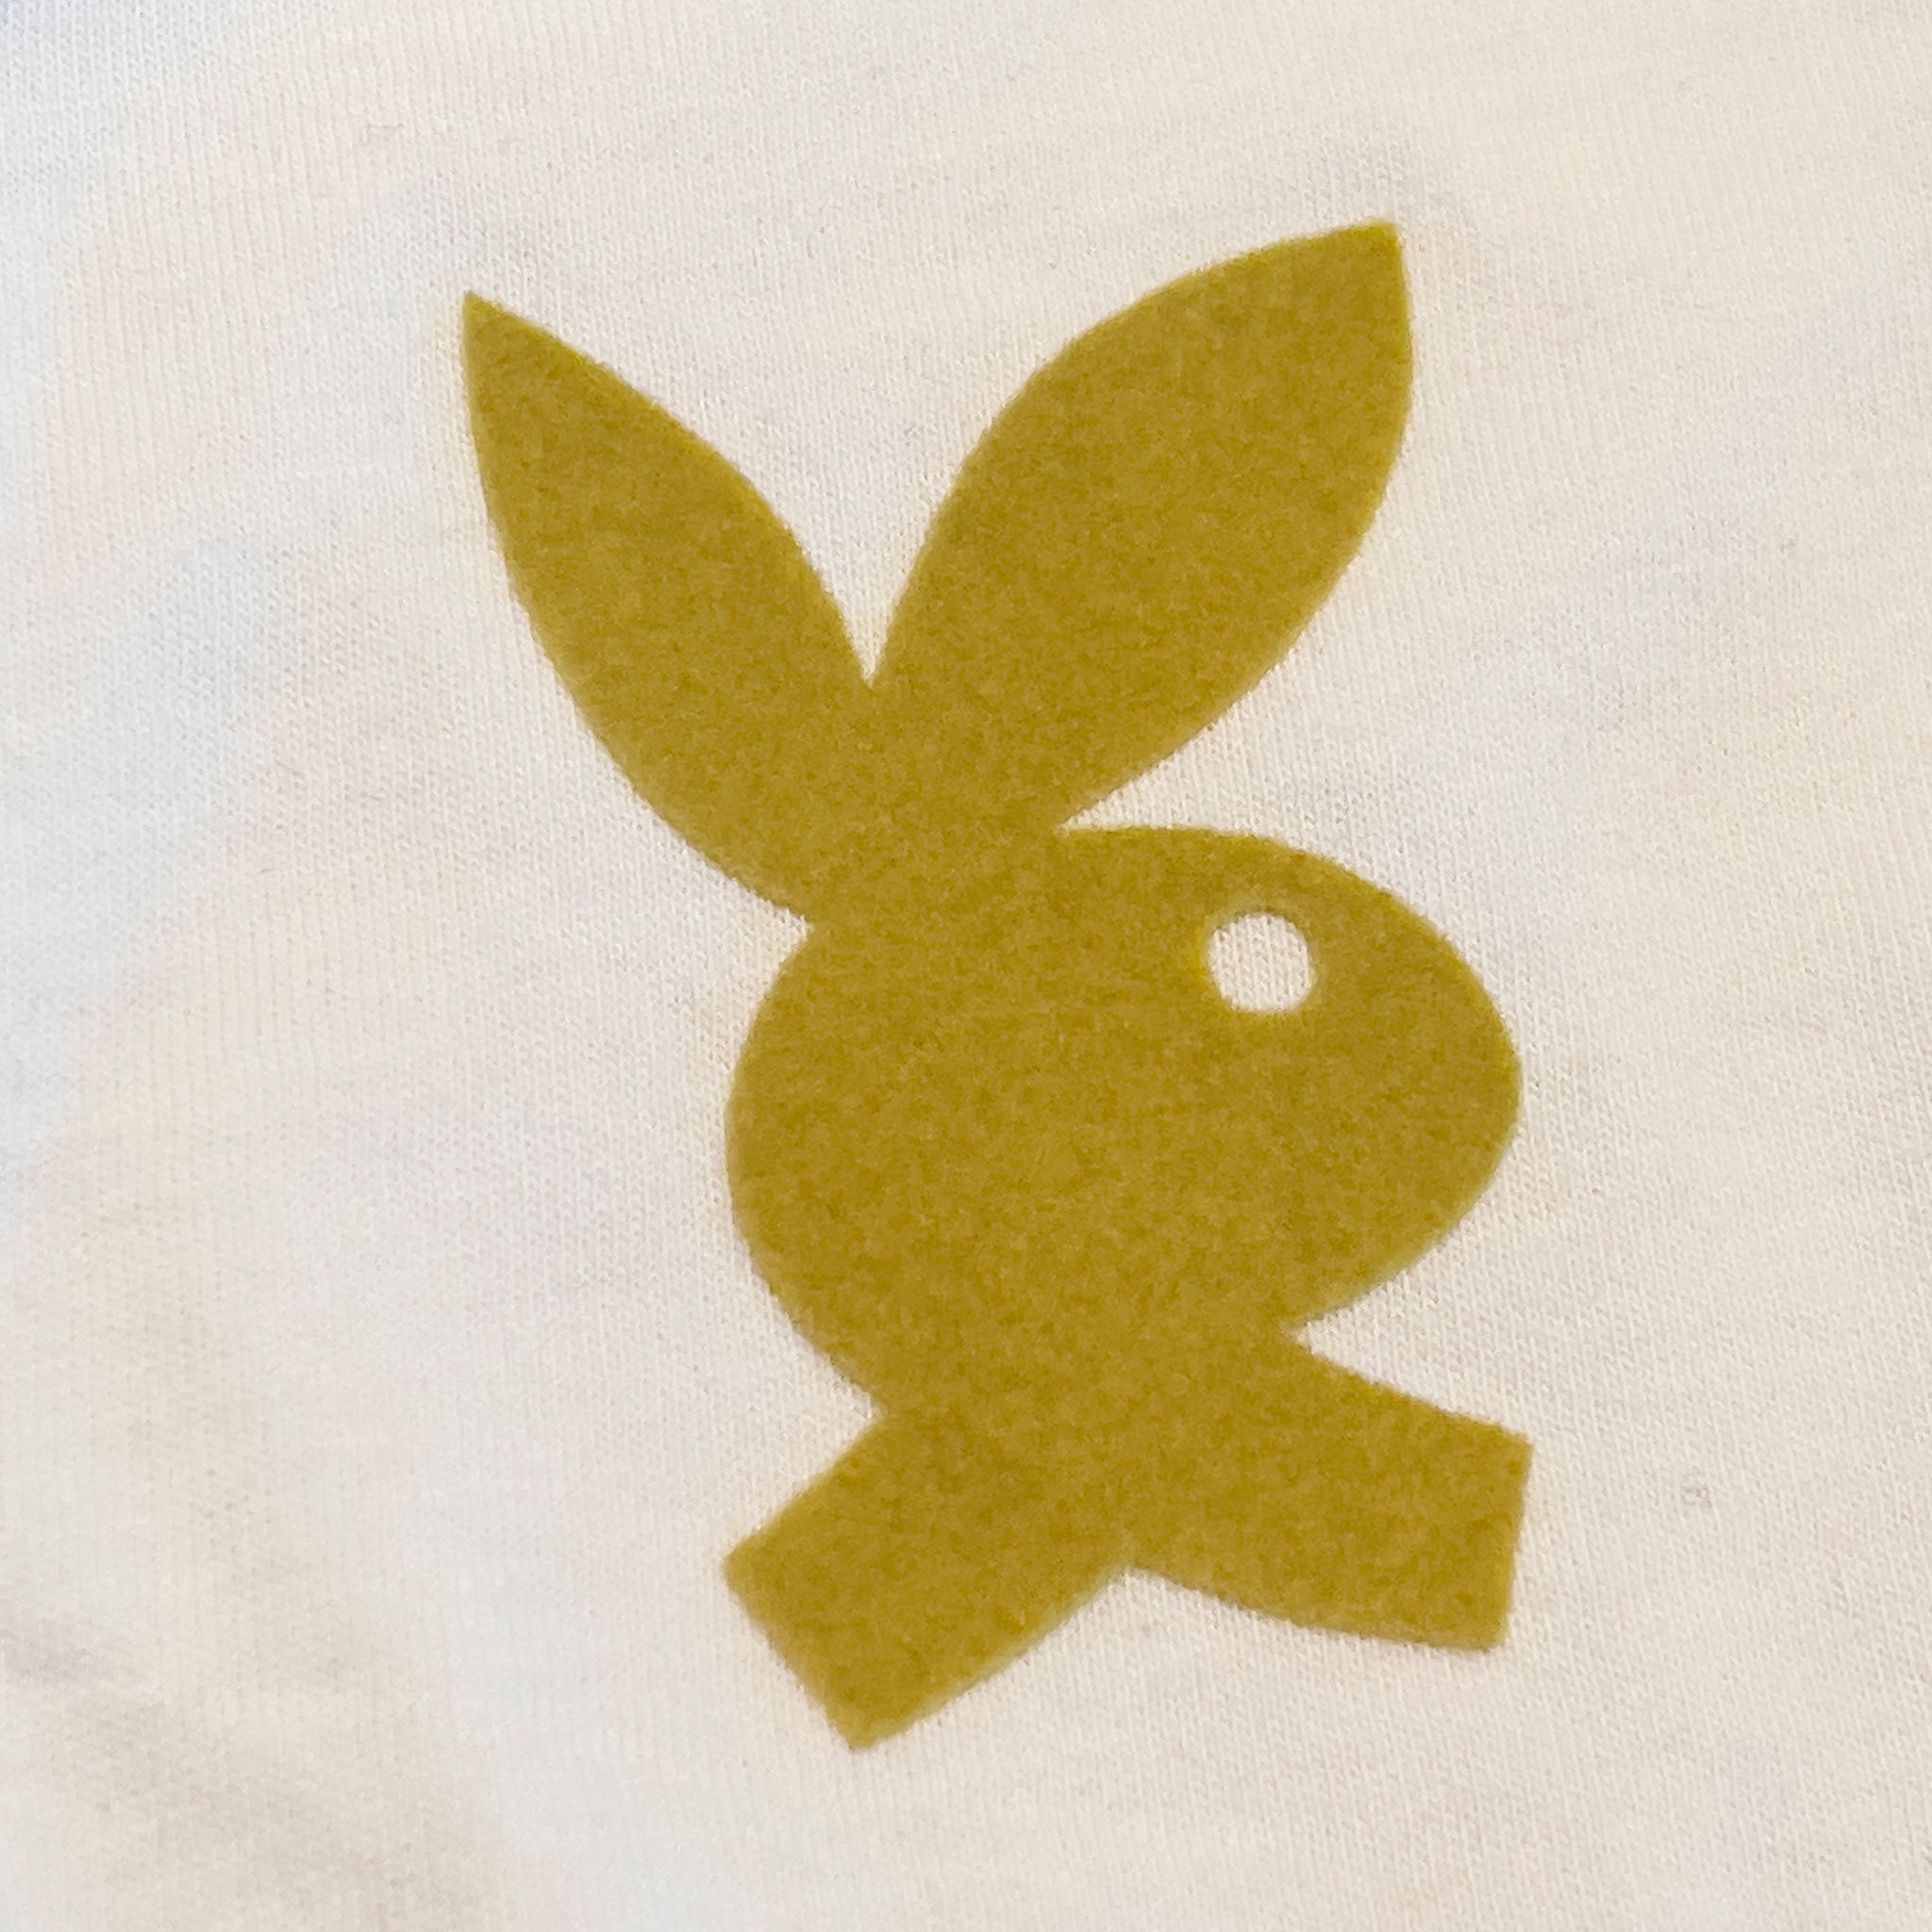 Playboy Bunny Iron On Patch